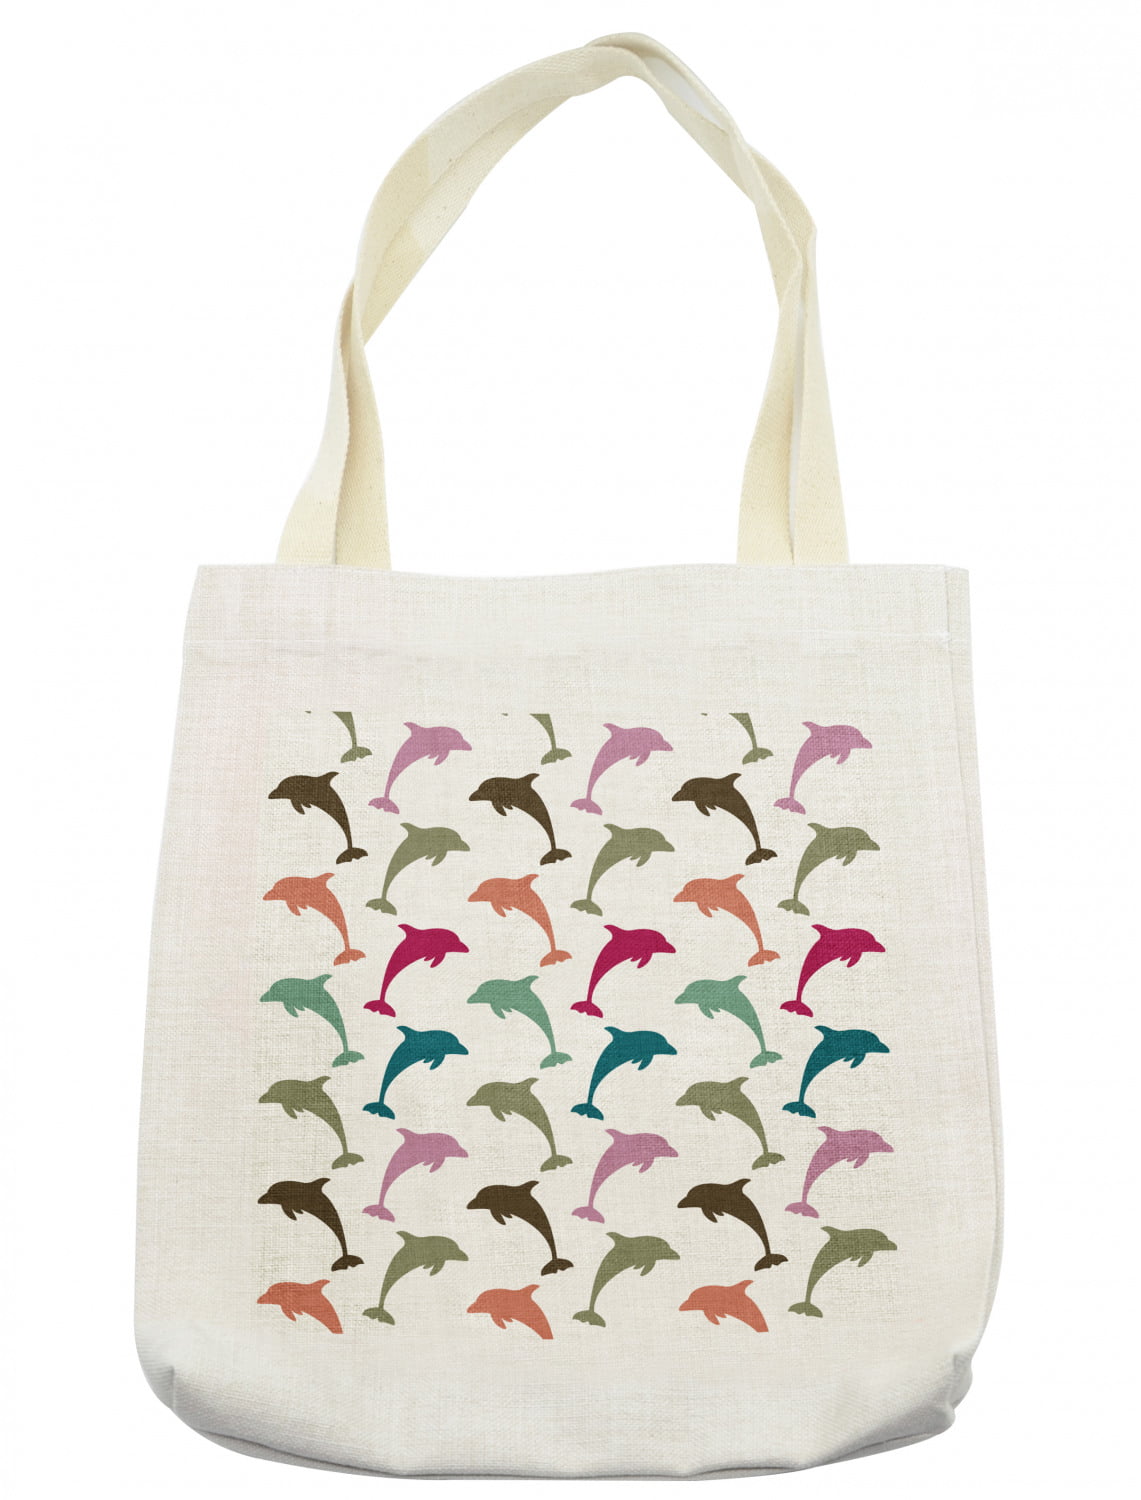 Sea Animals Tote Bag, Colorful Dolphin on White Background Ocean Marine  Animal Illustration, Cloth Linen Reusable Bag for Shopping Books Beach and  More, 